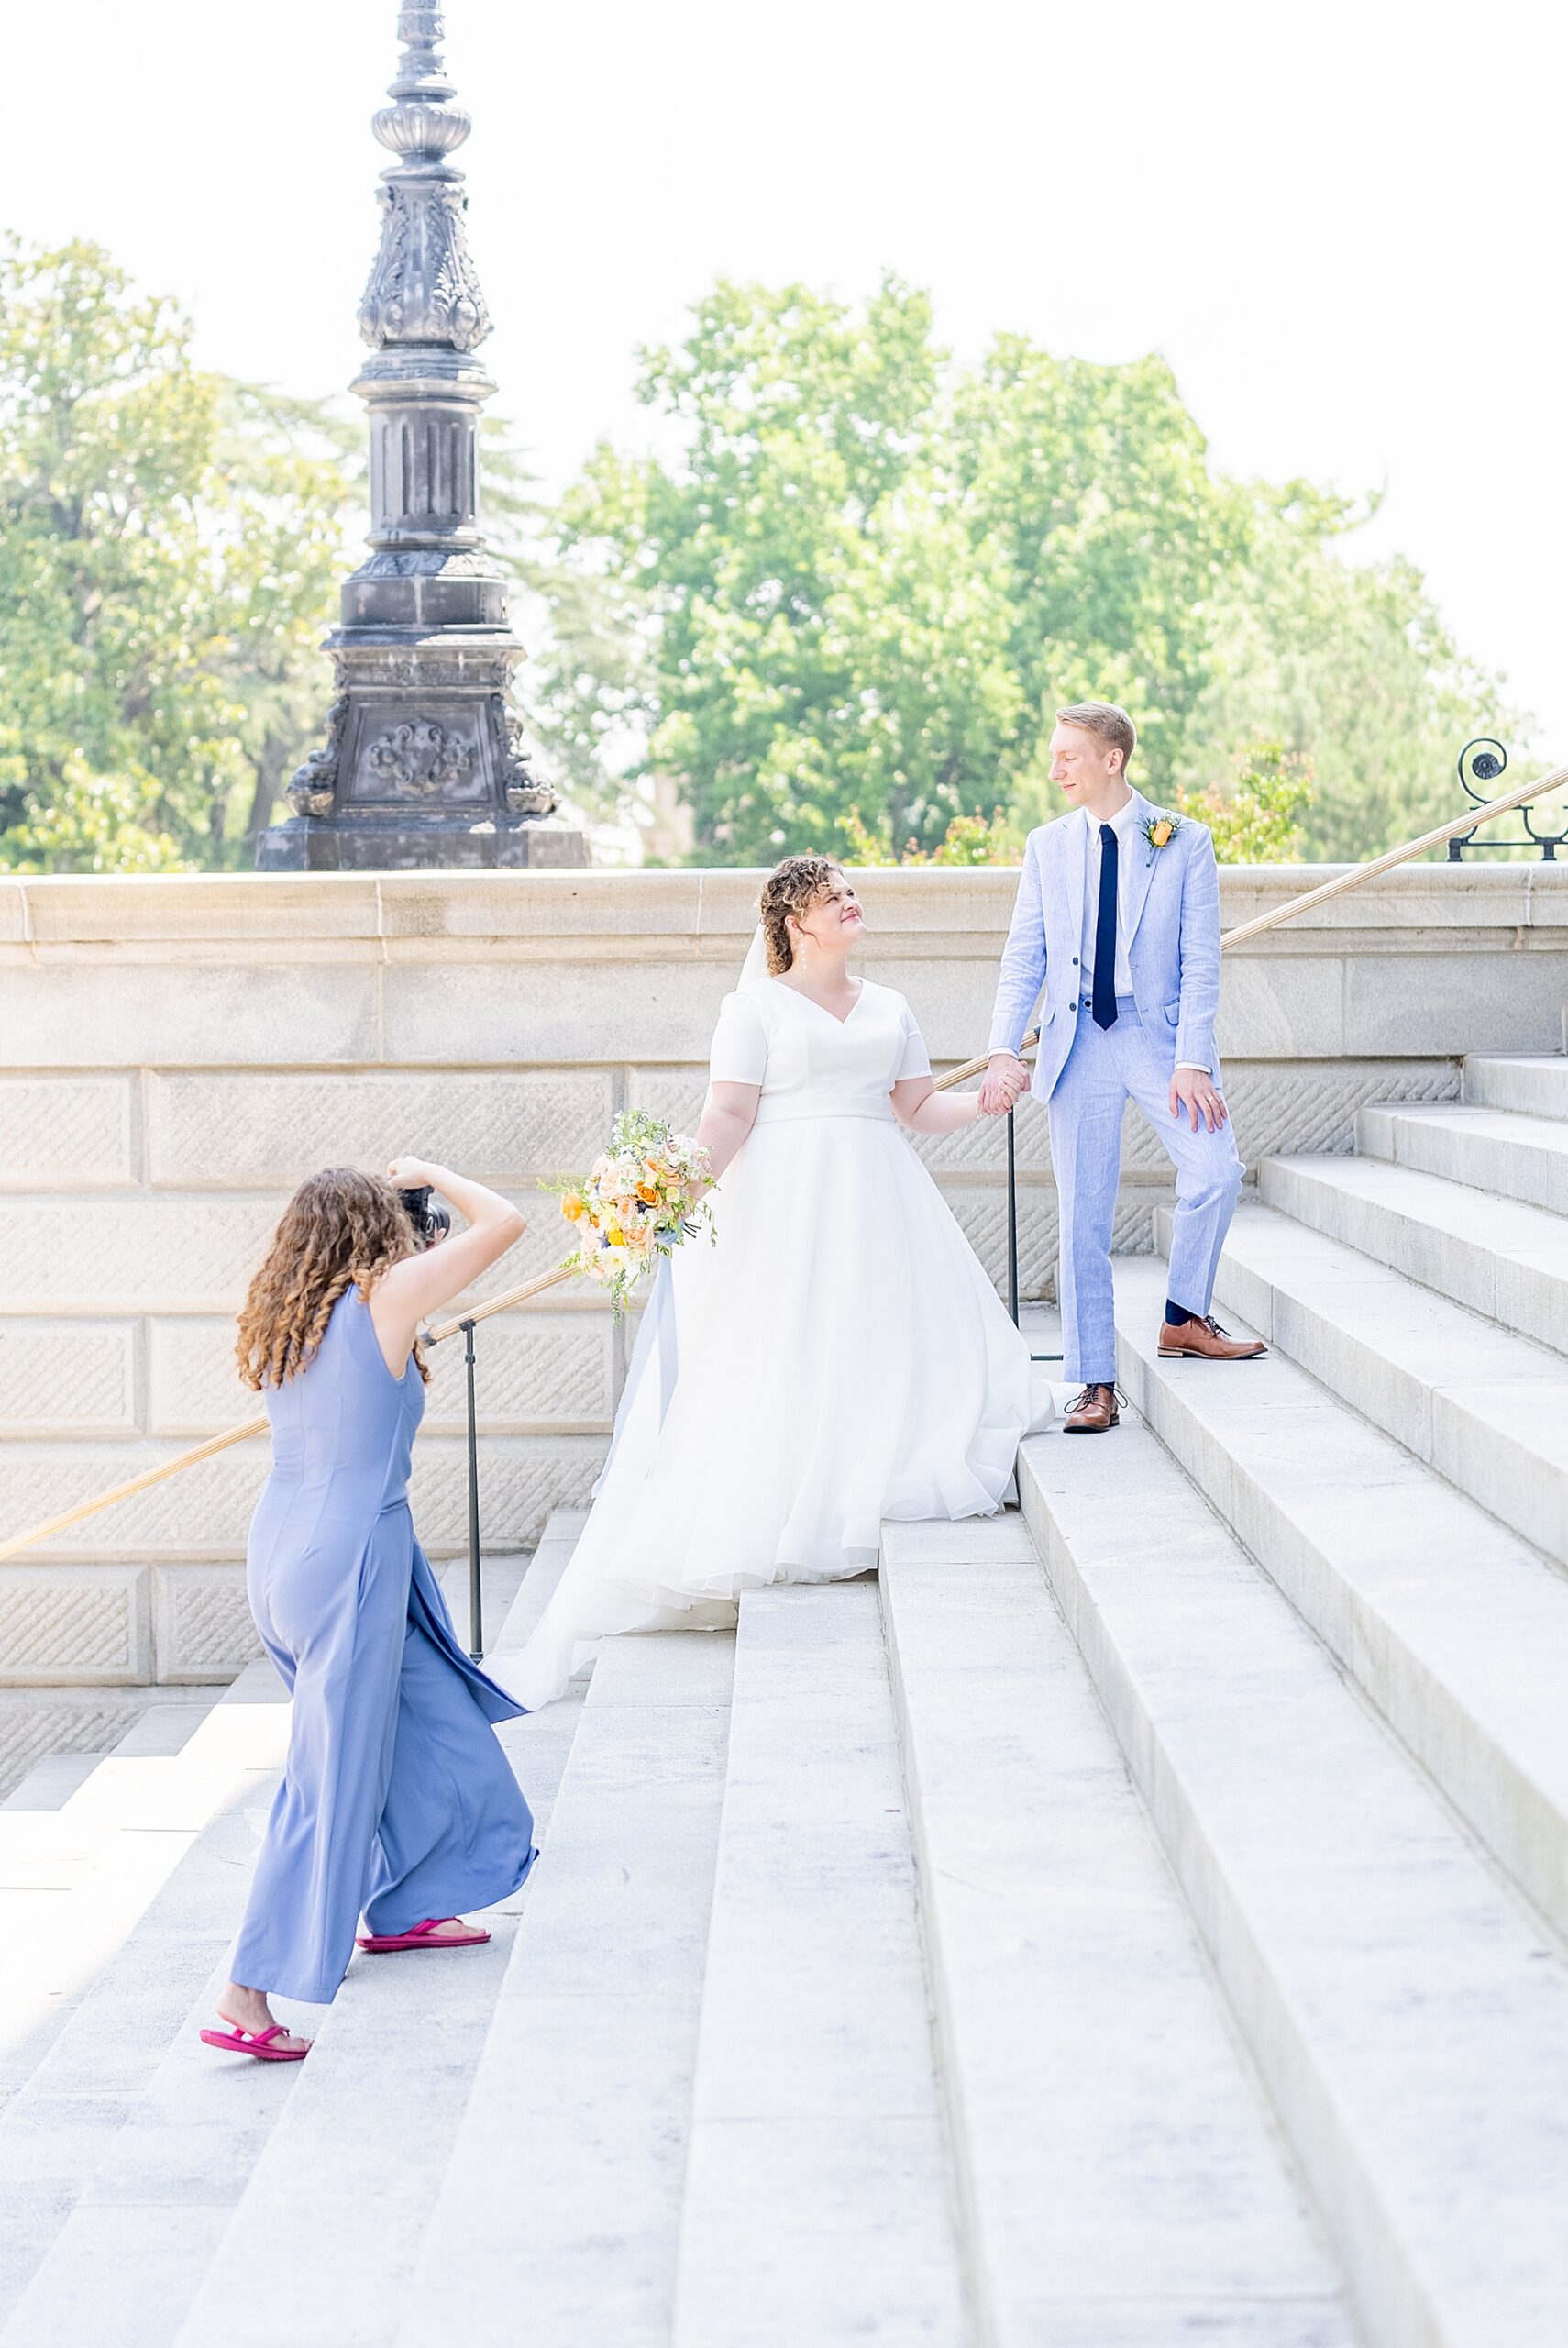 South Carolina Wedding photographer Sarah Claire Portraiture shares her Elevated Client Experience